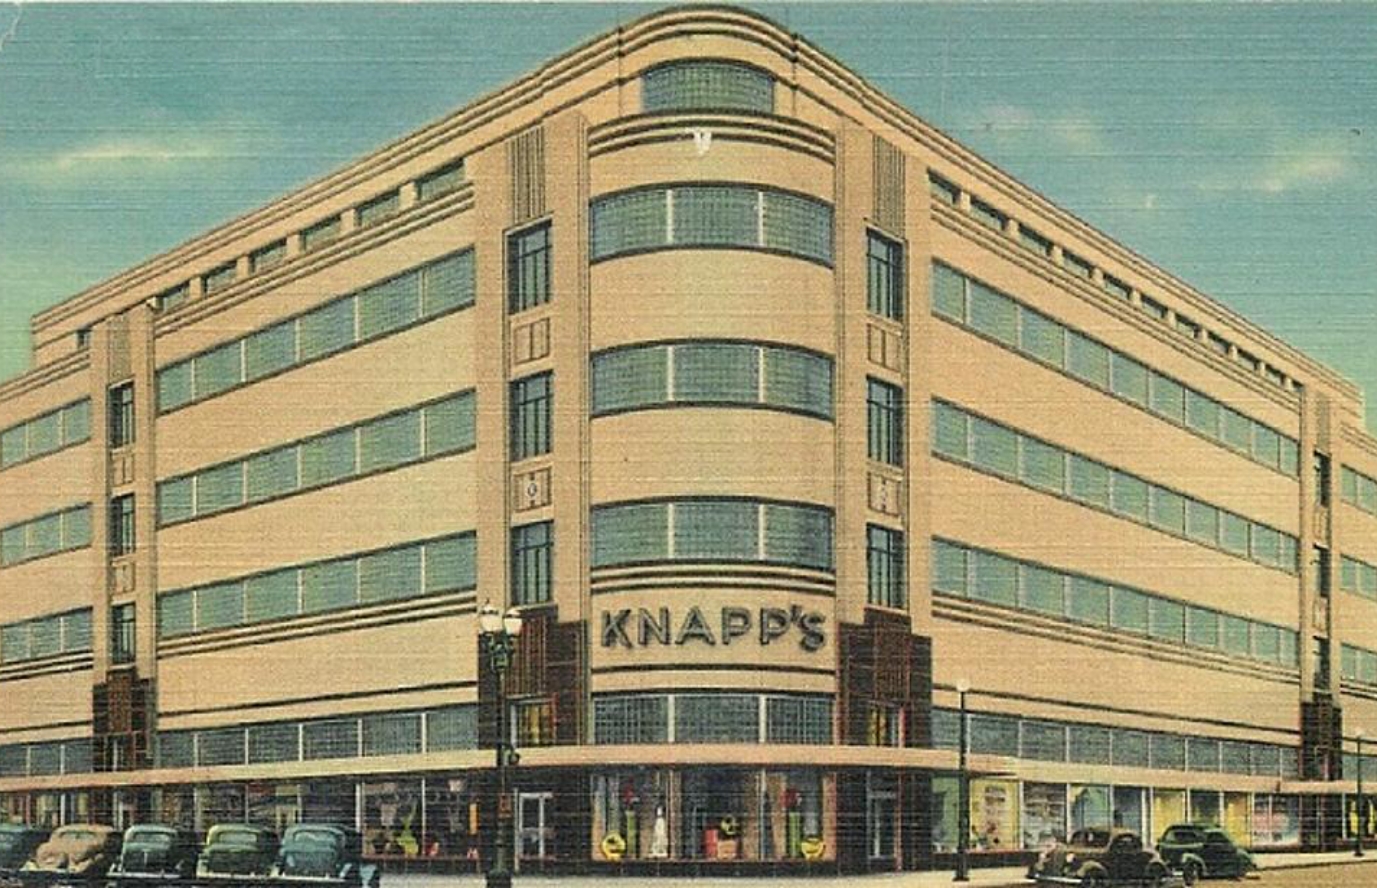 Historical photo of the Knapp's building